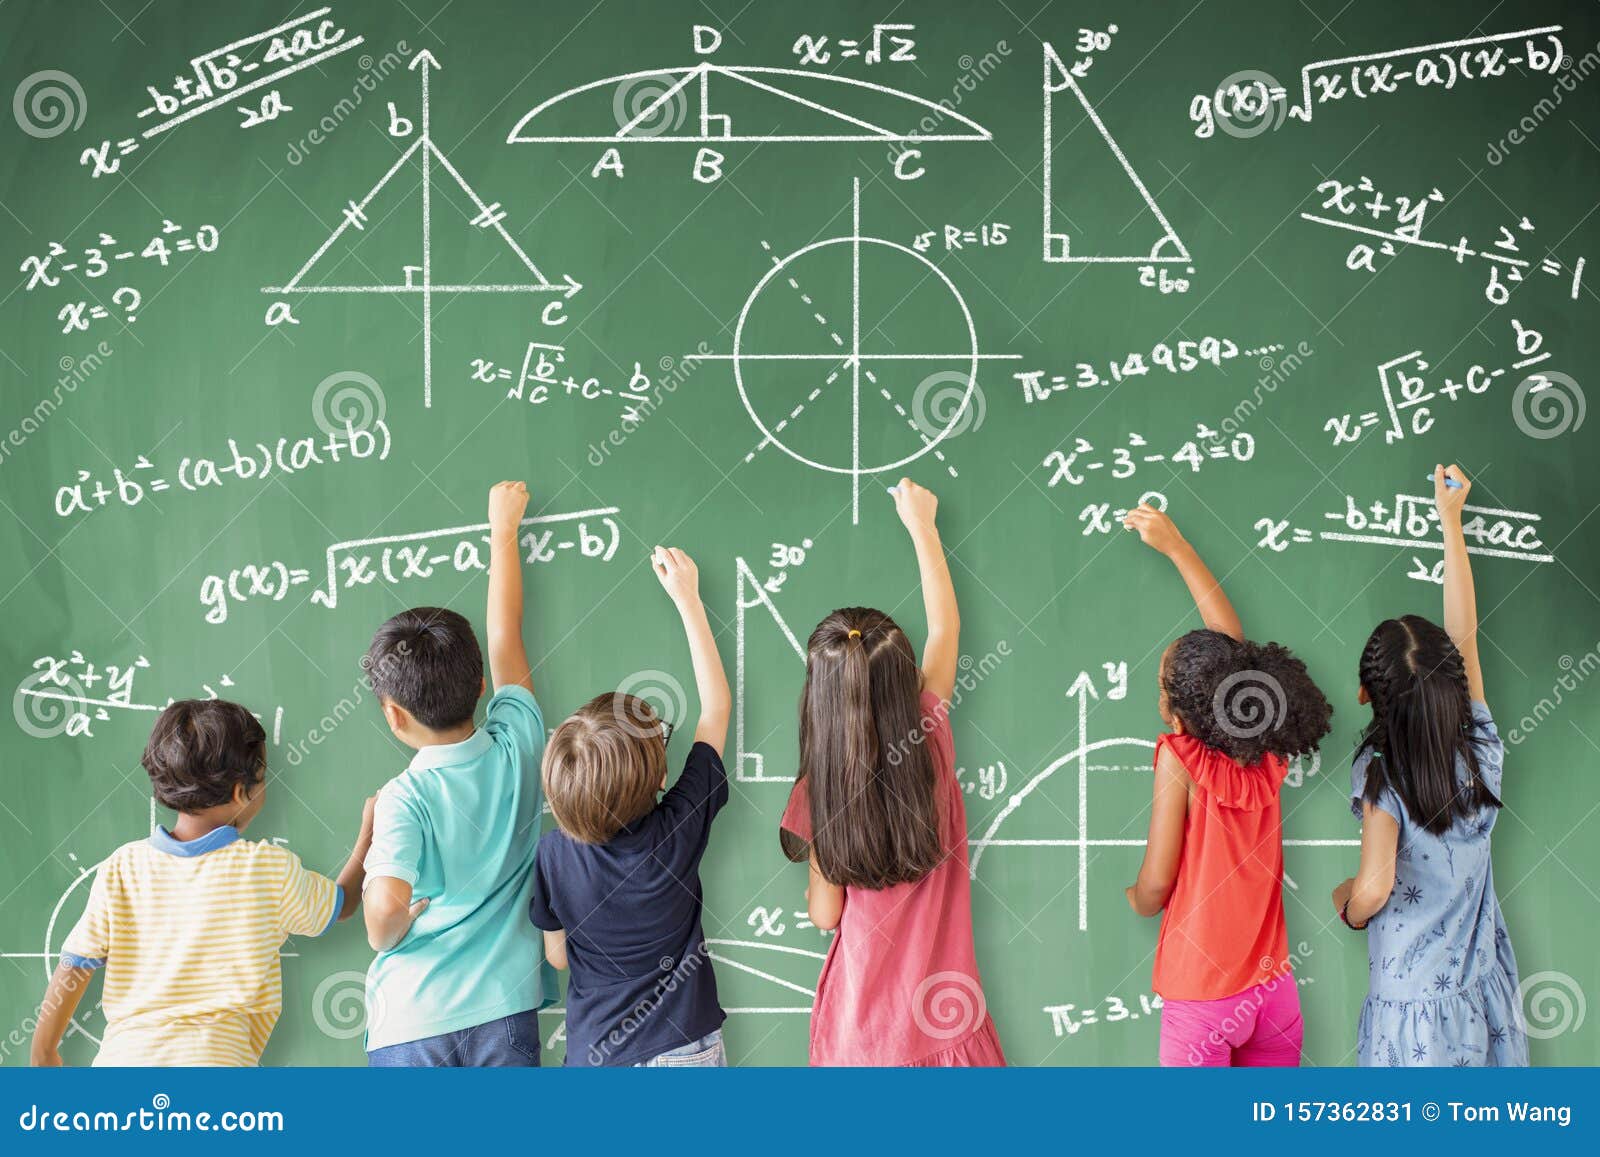 Children Drawing Math Icon on the Chalkboard Stock Image - Image ...